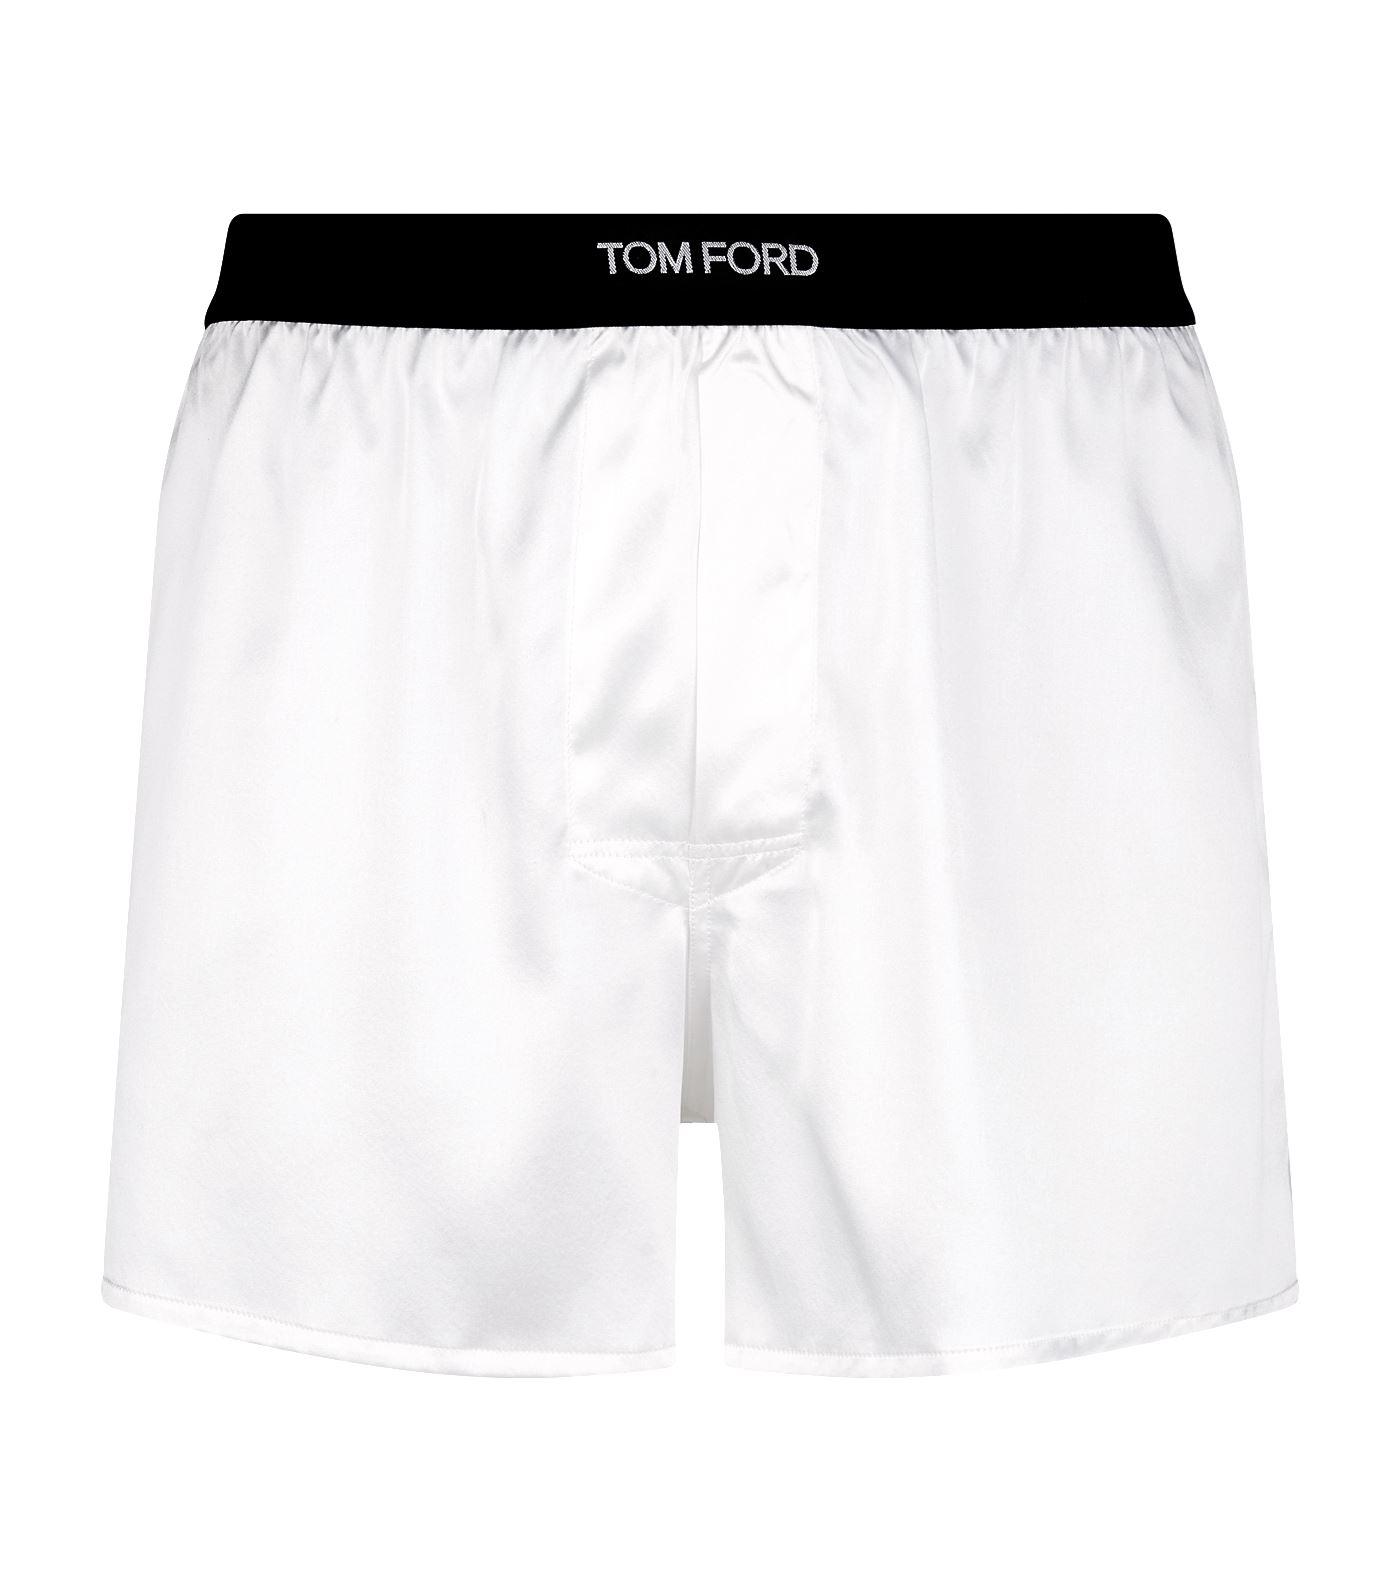 Tom Ford Silk Boxers in White for Men - Save 1% - Lyst